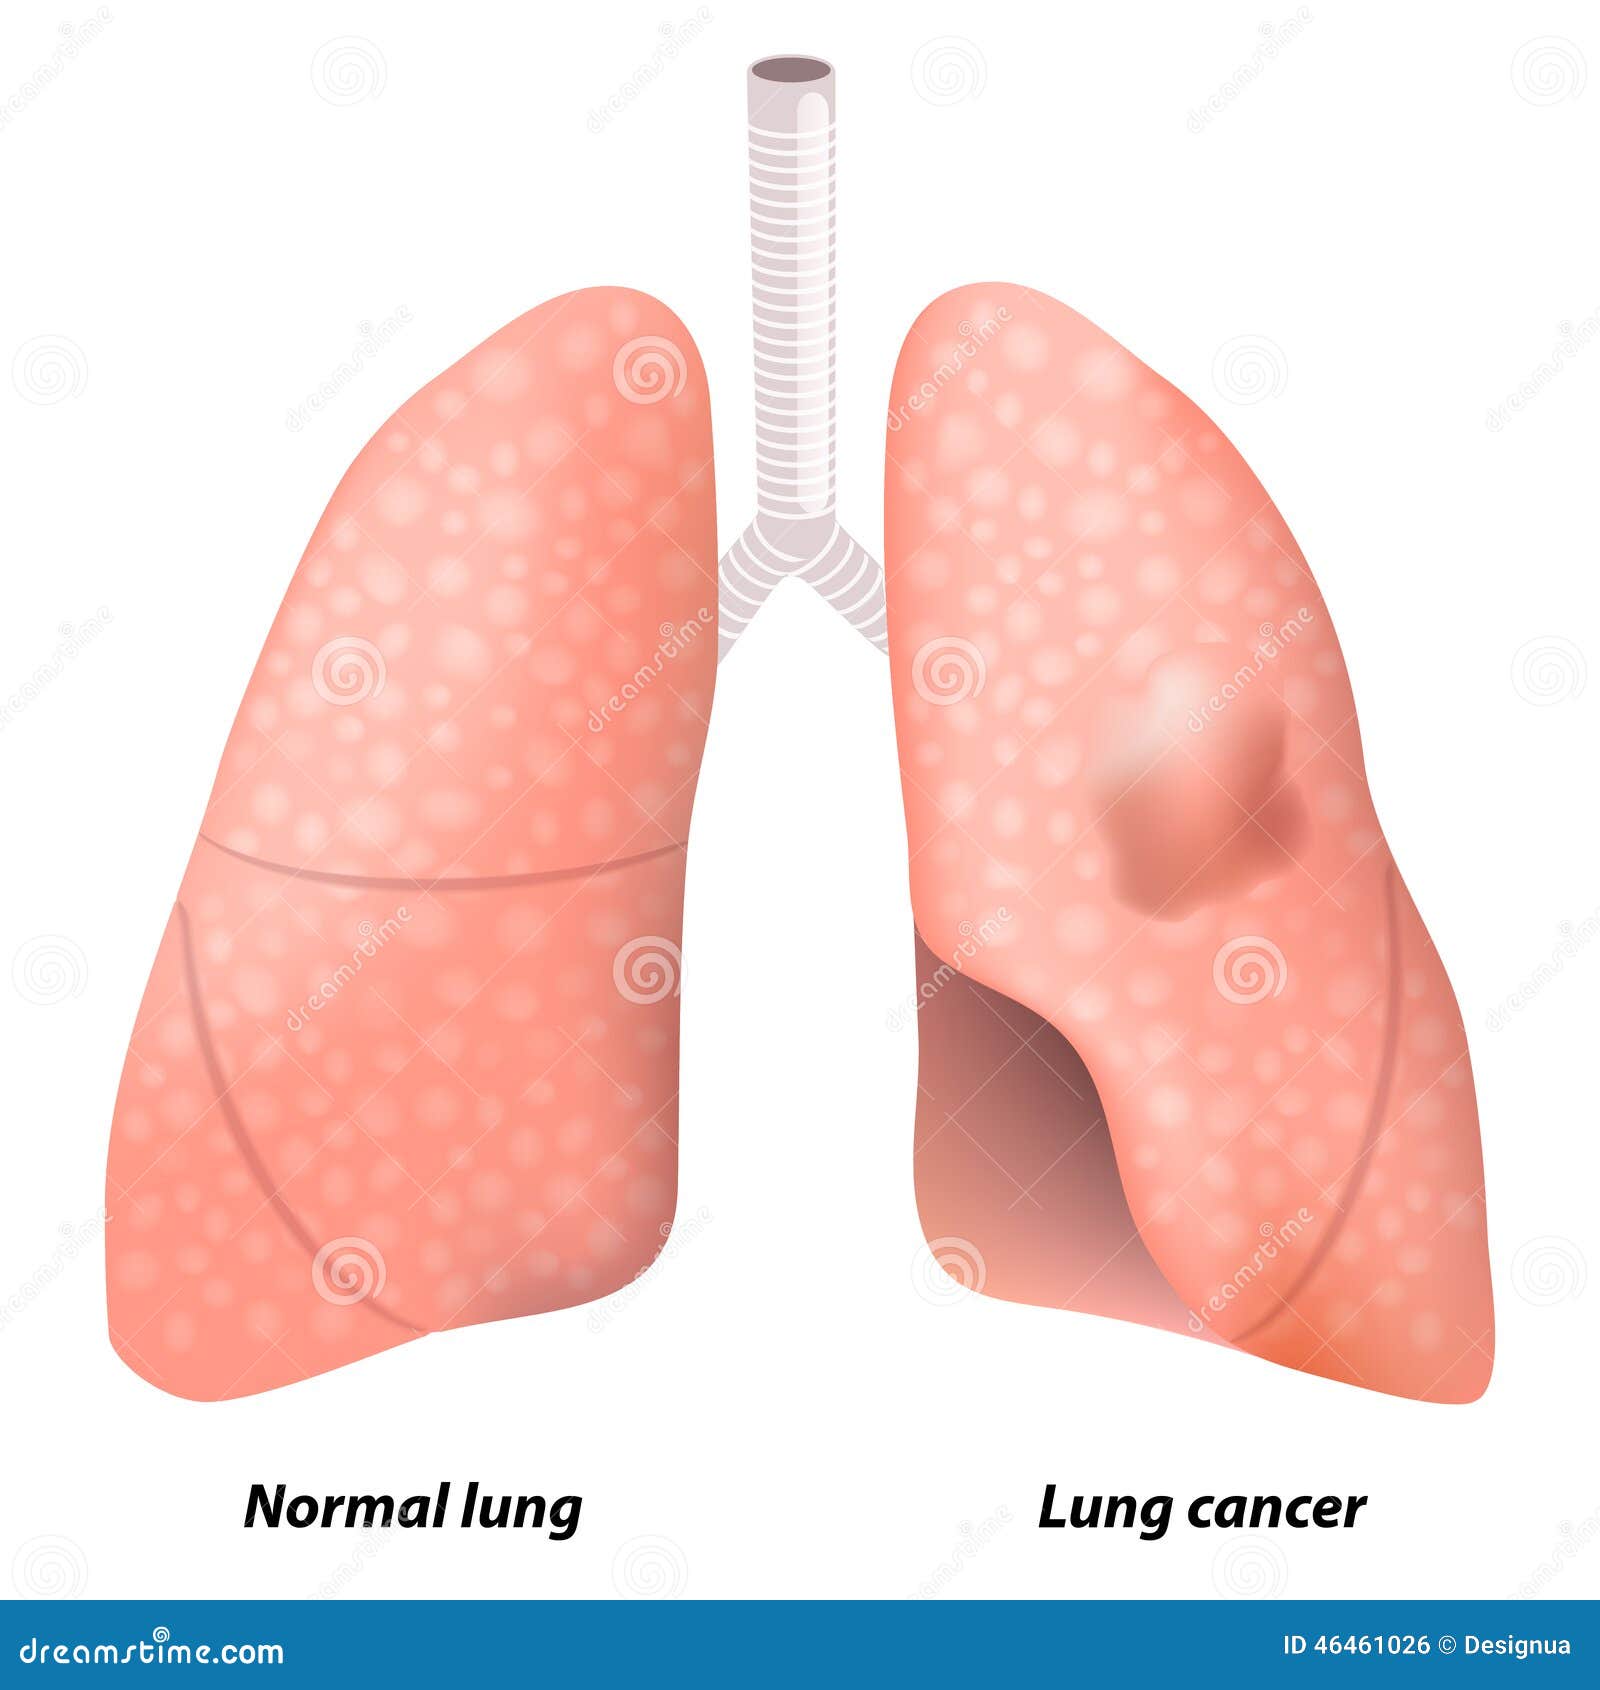 Lung cancer stock vector. Illustration of bronchi, healthy - 46461026